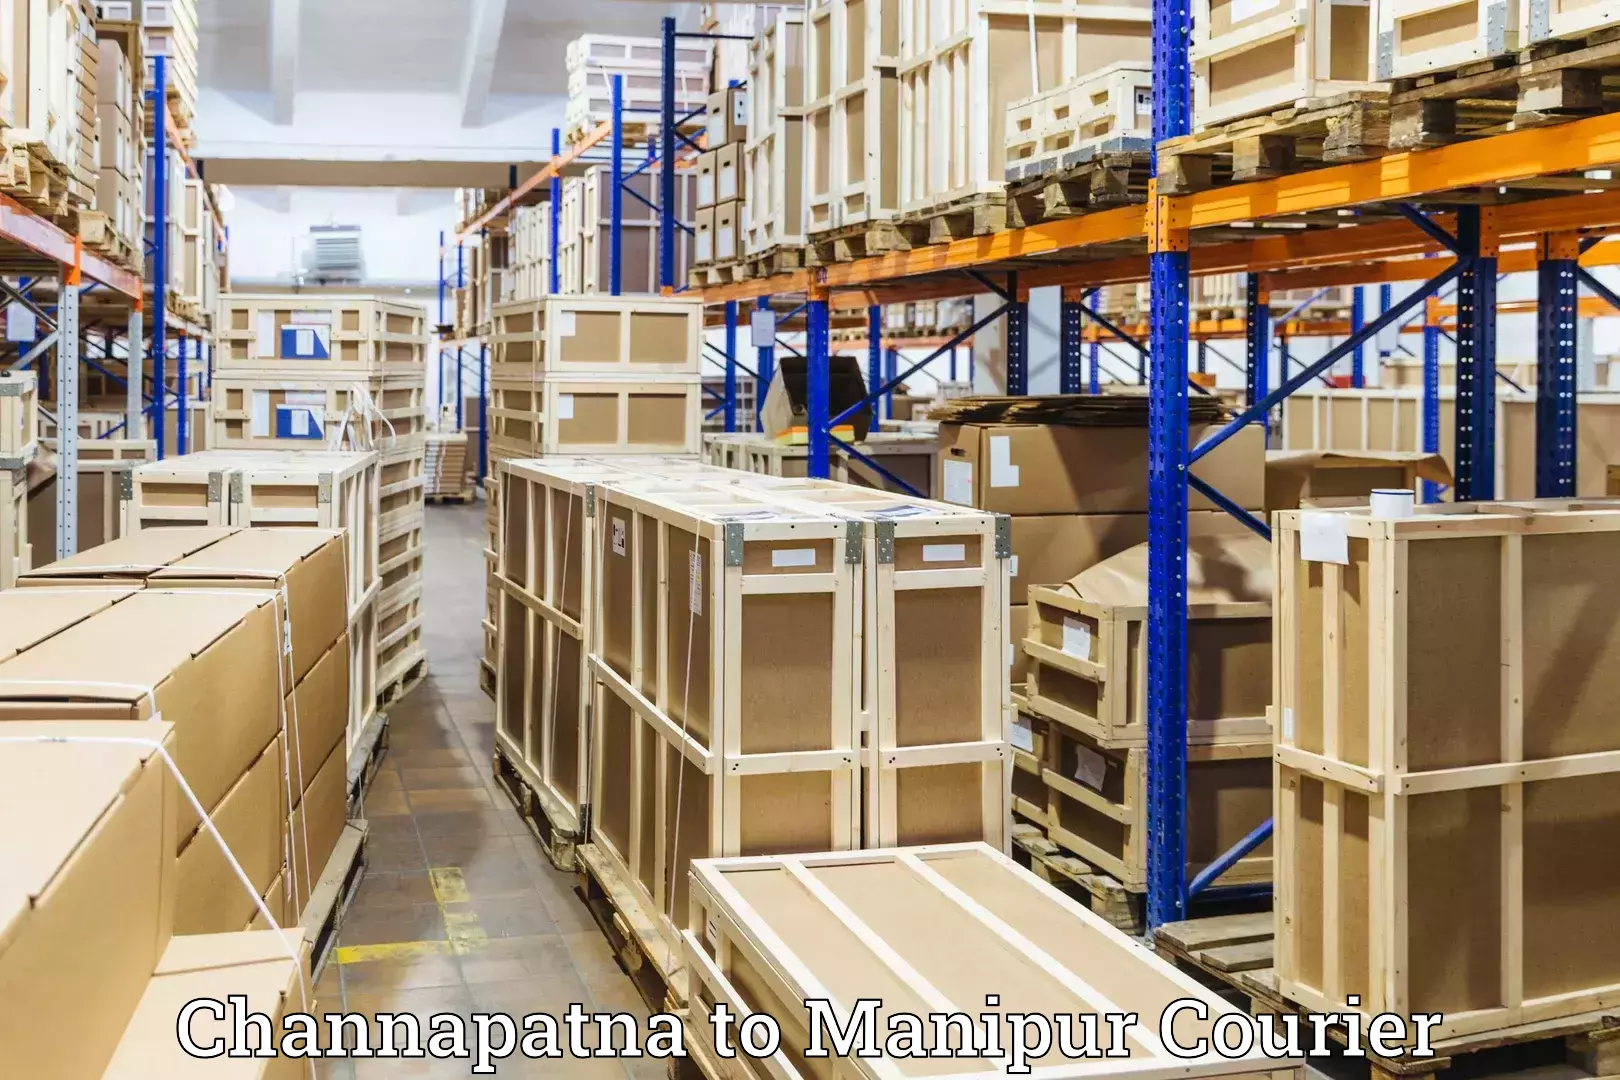 Luggage shipment specialists Channapatna to Manipur